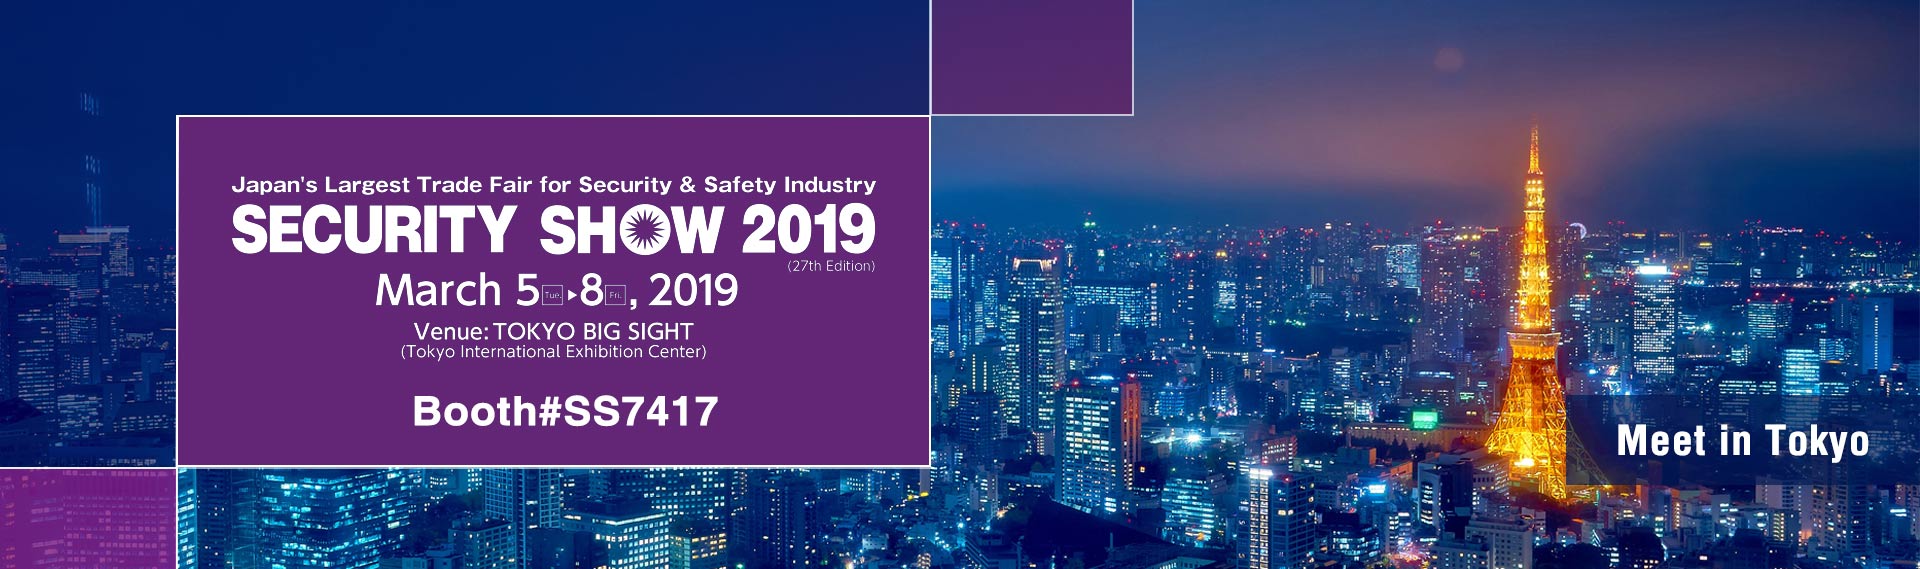 Telpo Launches Smart Security Solution at Japan Security Show 2019